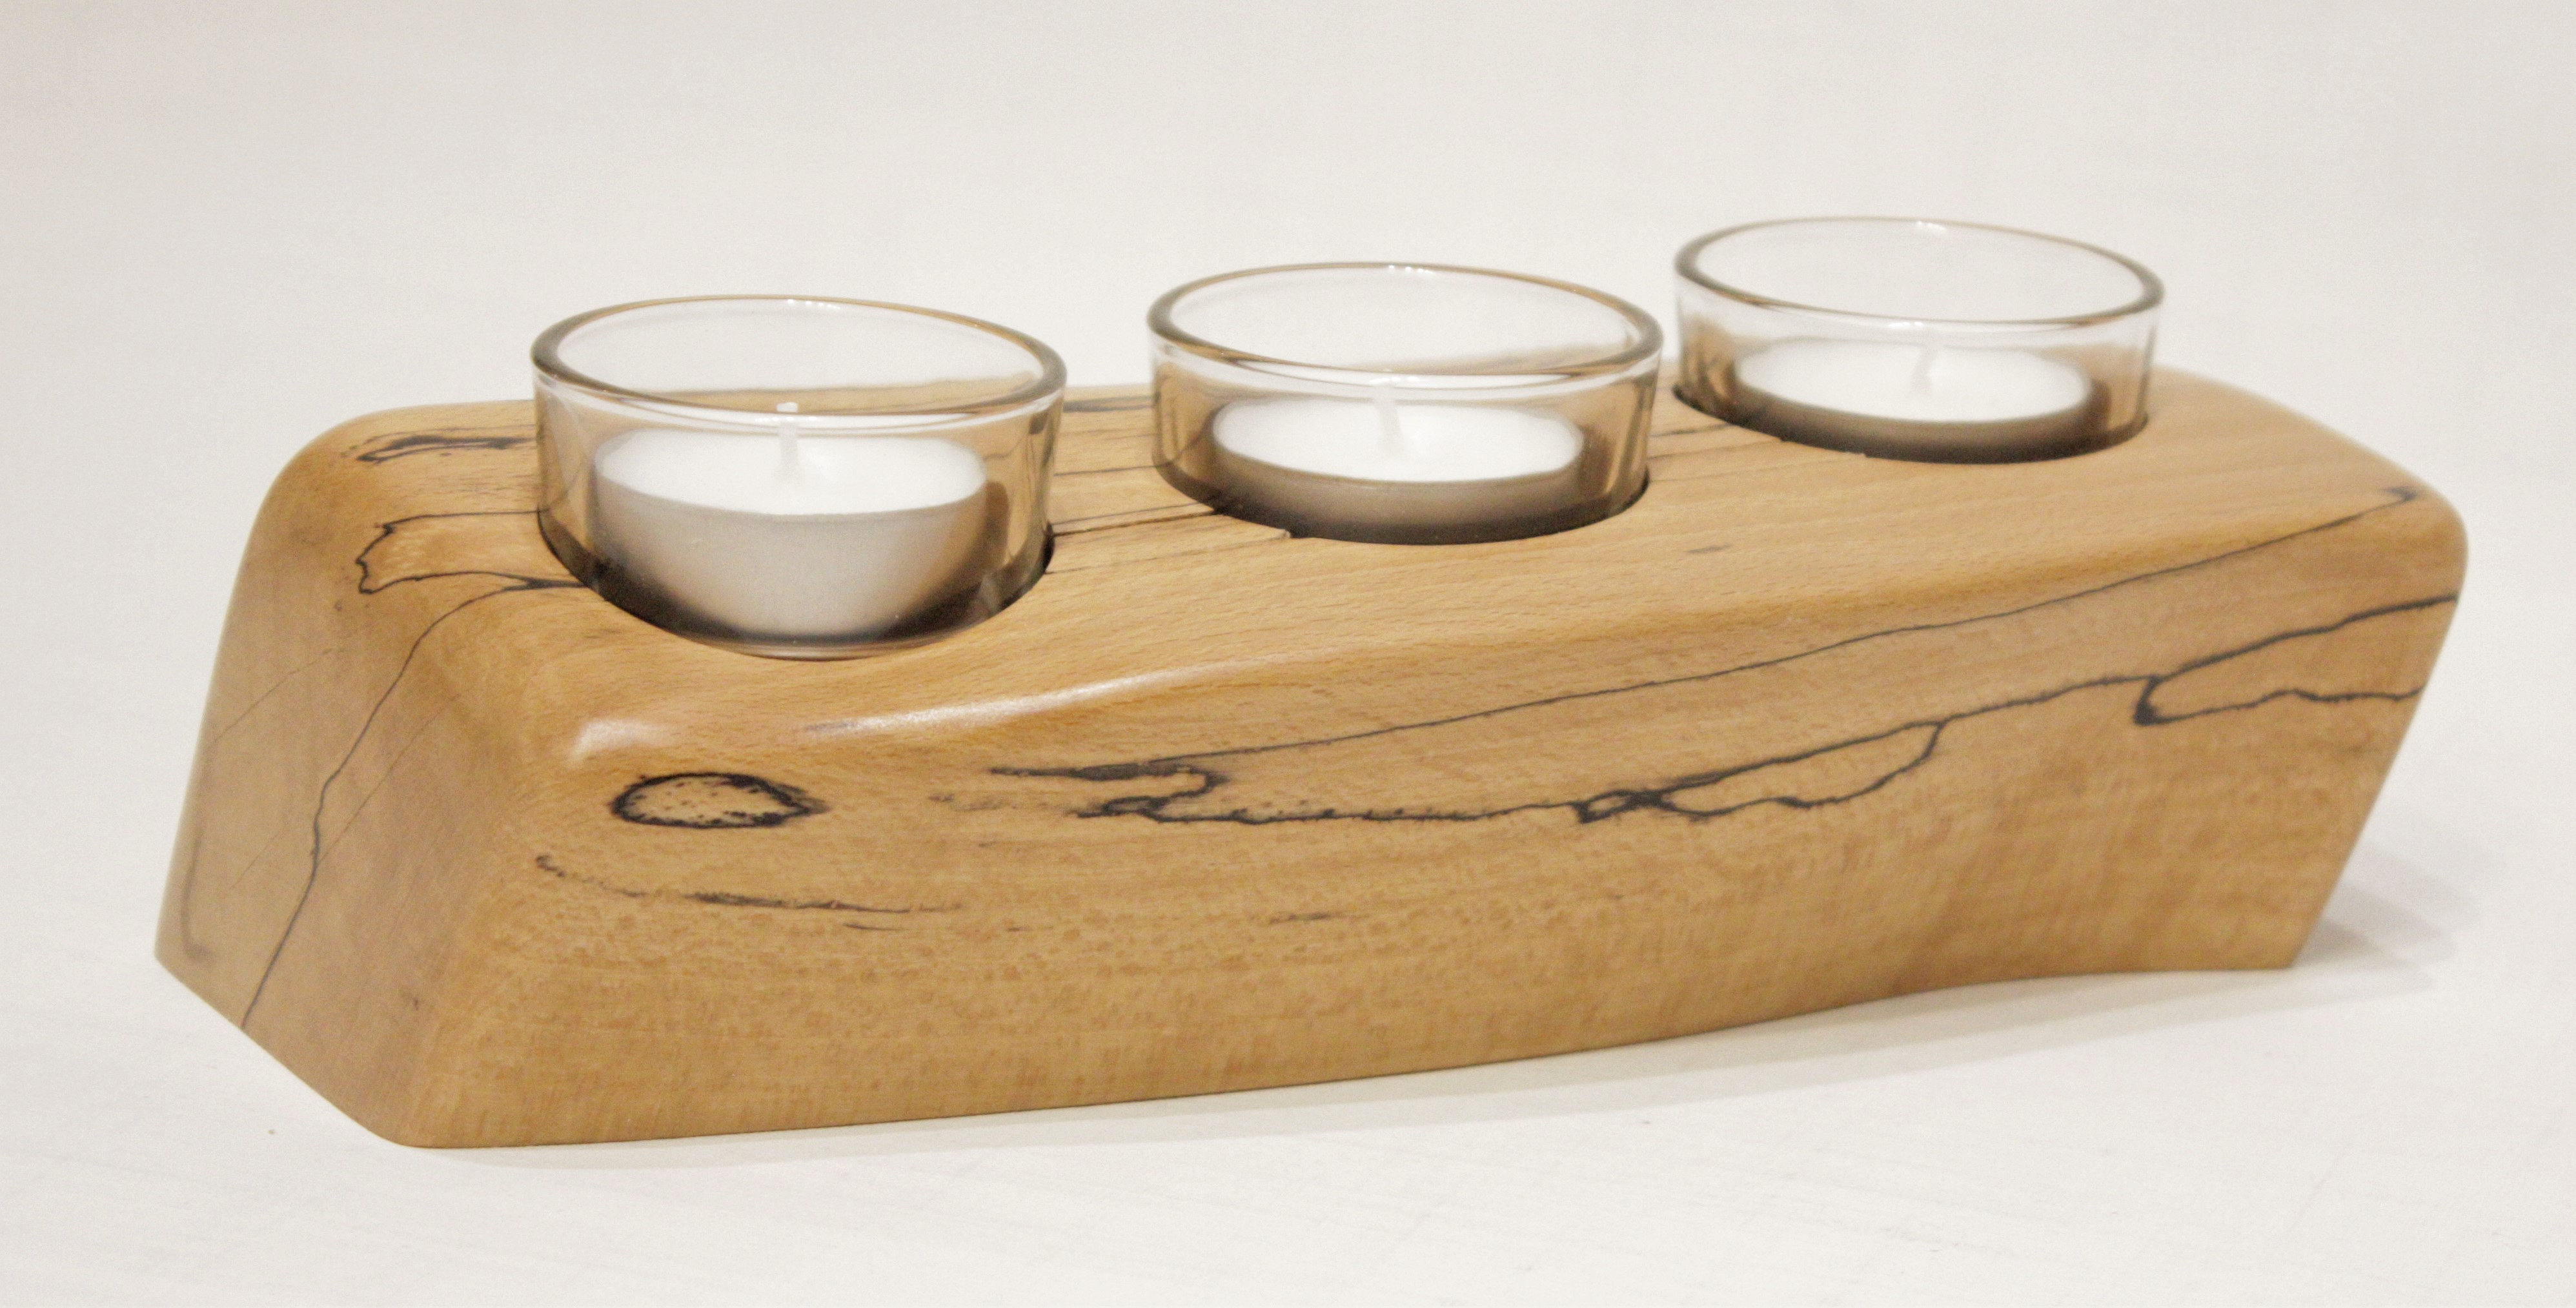 Glass holders and Tealights included.
22cm long, 6cm tall (not including glass), 10cm wide.